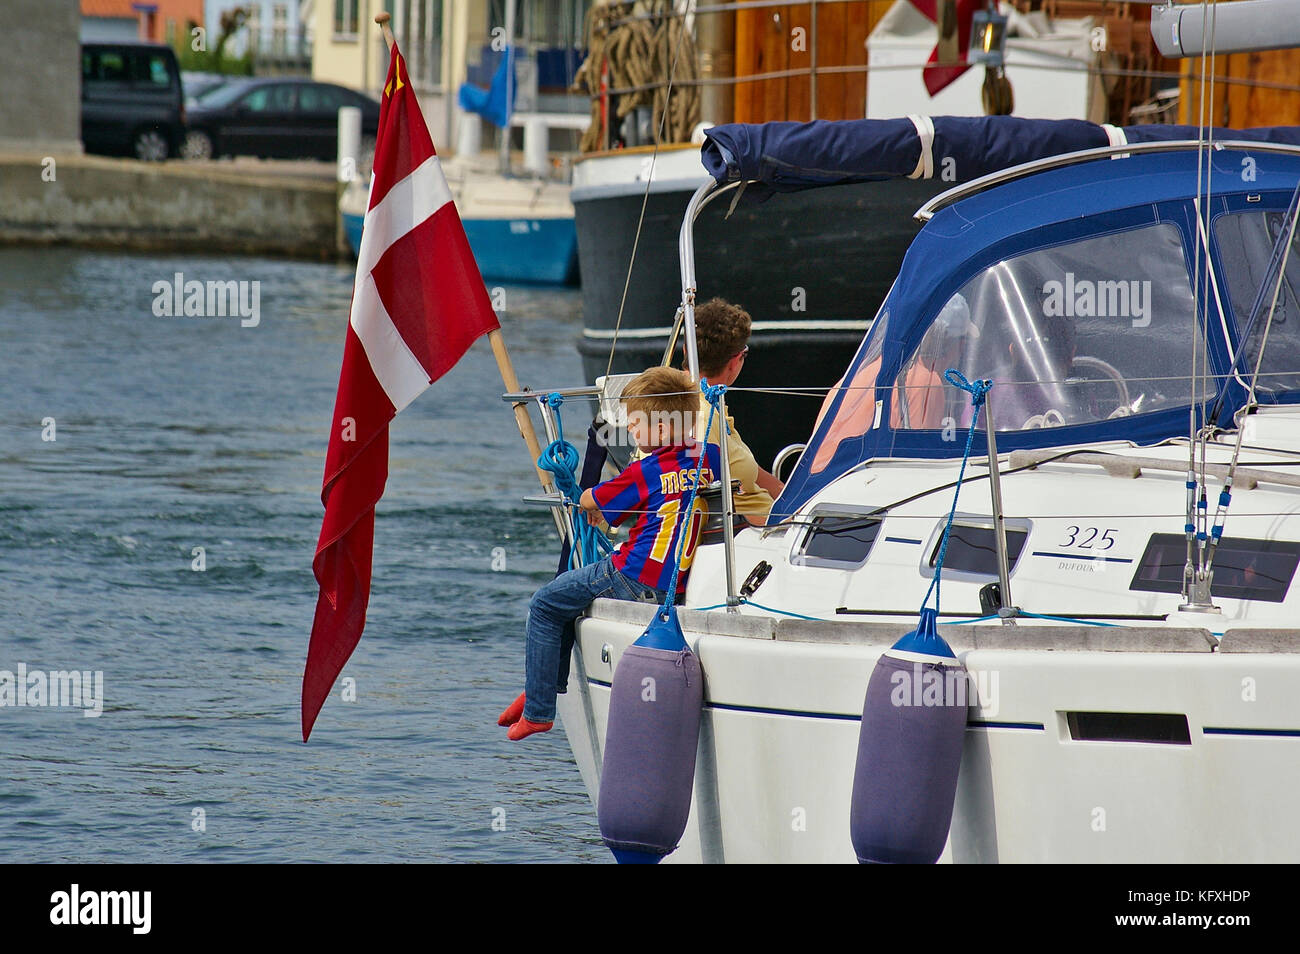 Sonderborg, Denmark - July 5th, 2012 - Young boy with soccer shirt sitting on the gunwhale of a white sailing yacht with the Danish flag next to him l Stock Photo